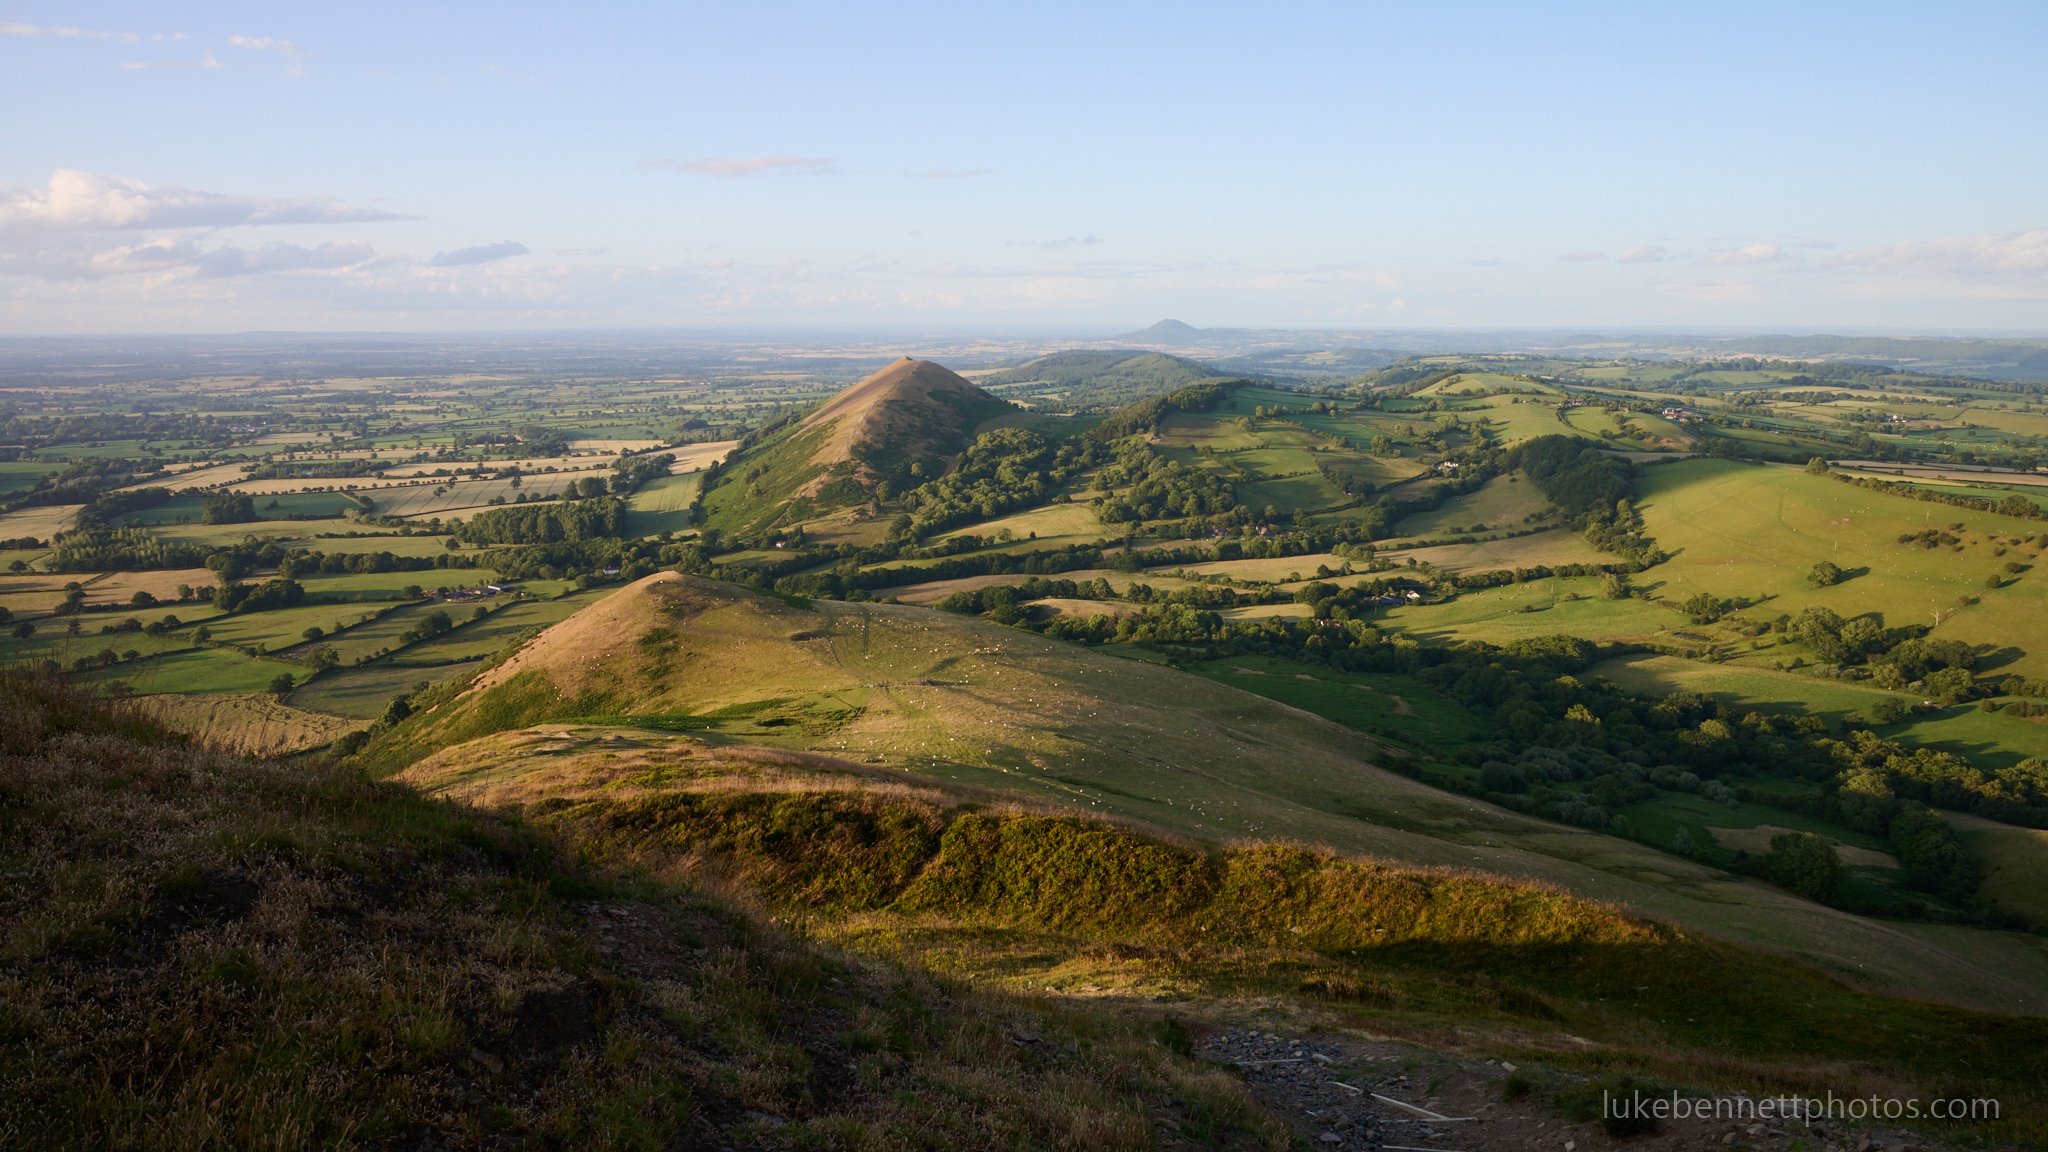  The view from the top of Caer Caradoc, looking over towards the Lawley, with the Wrekin in the far background 